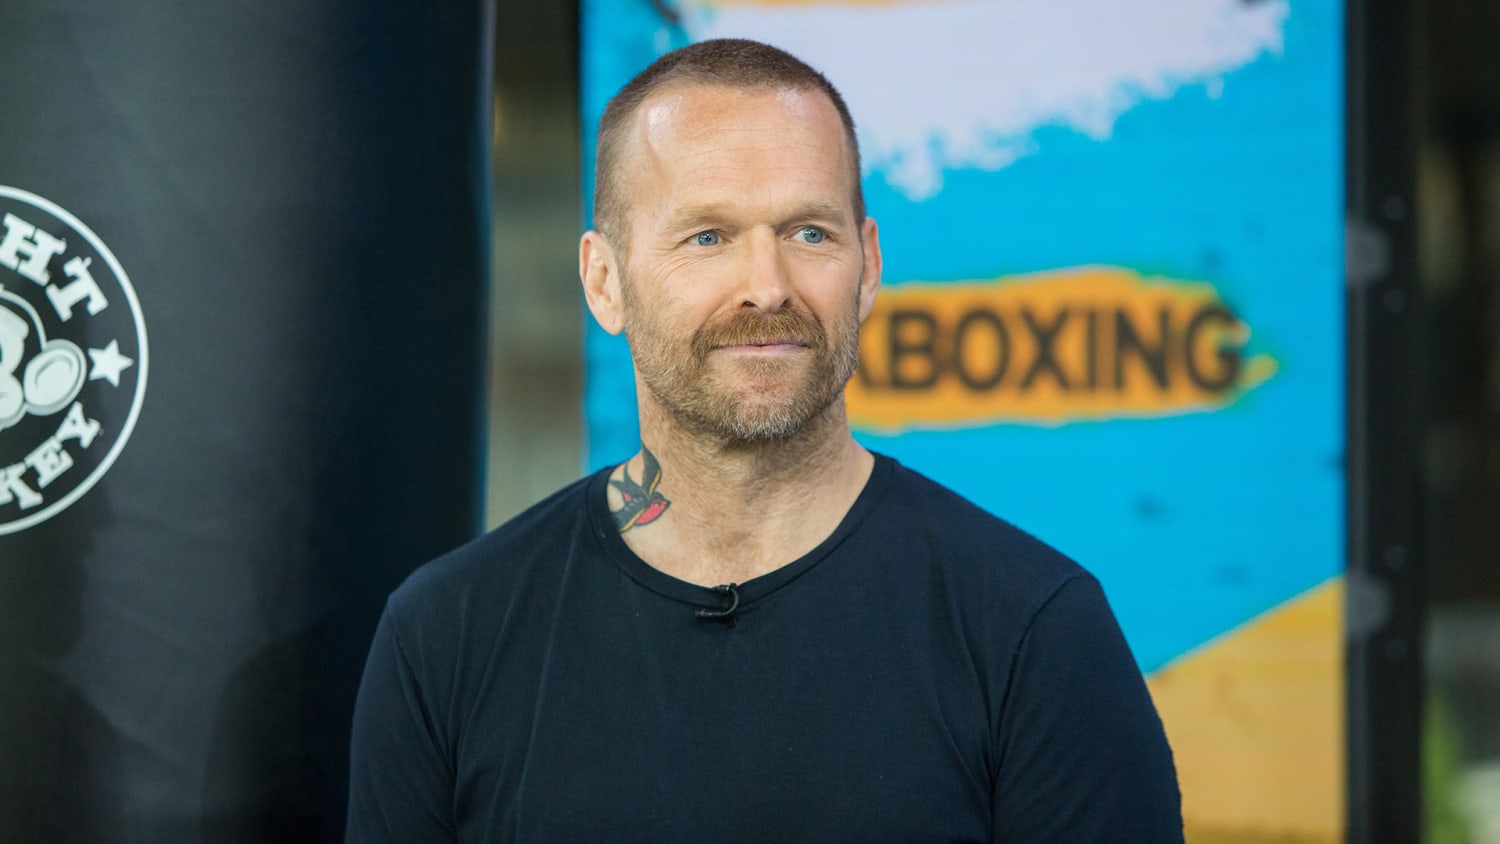 Celebrity trainer Bob Harper shares chilling photo 1 year after heart attac...